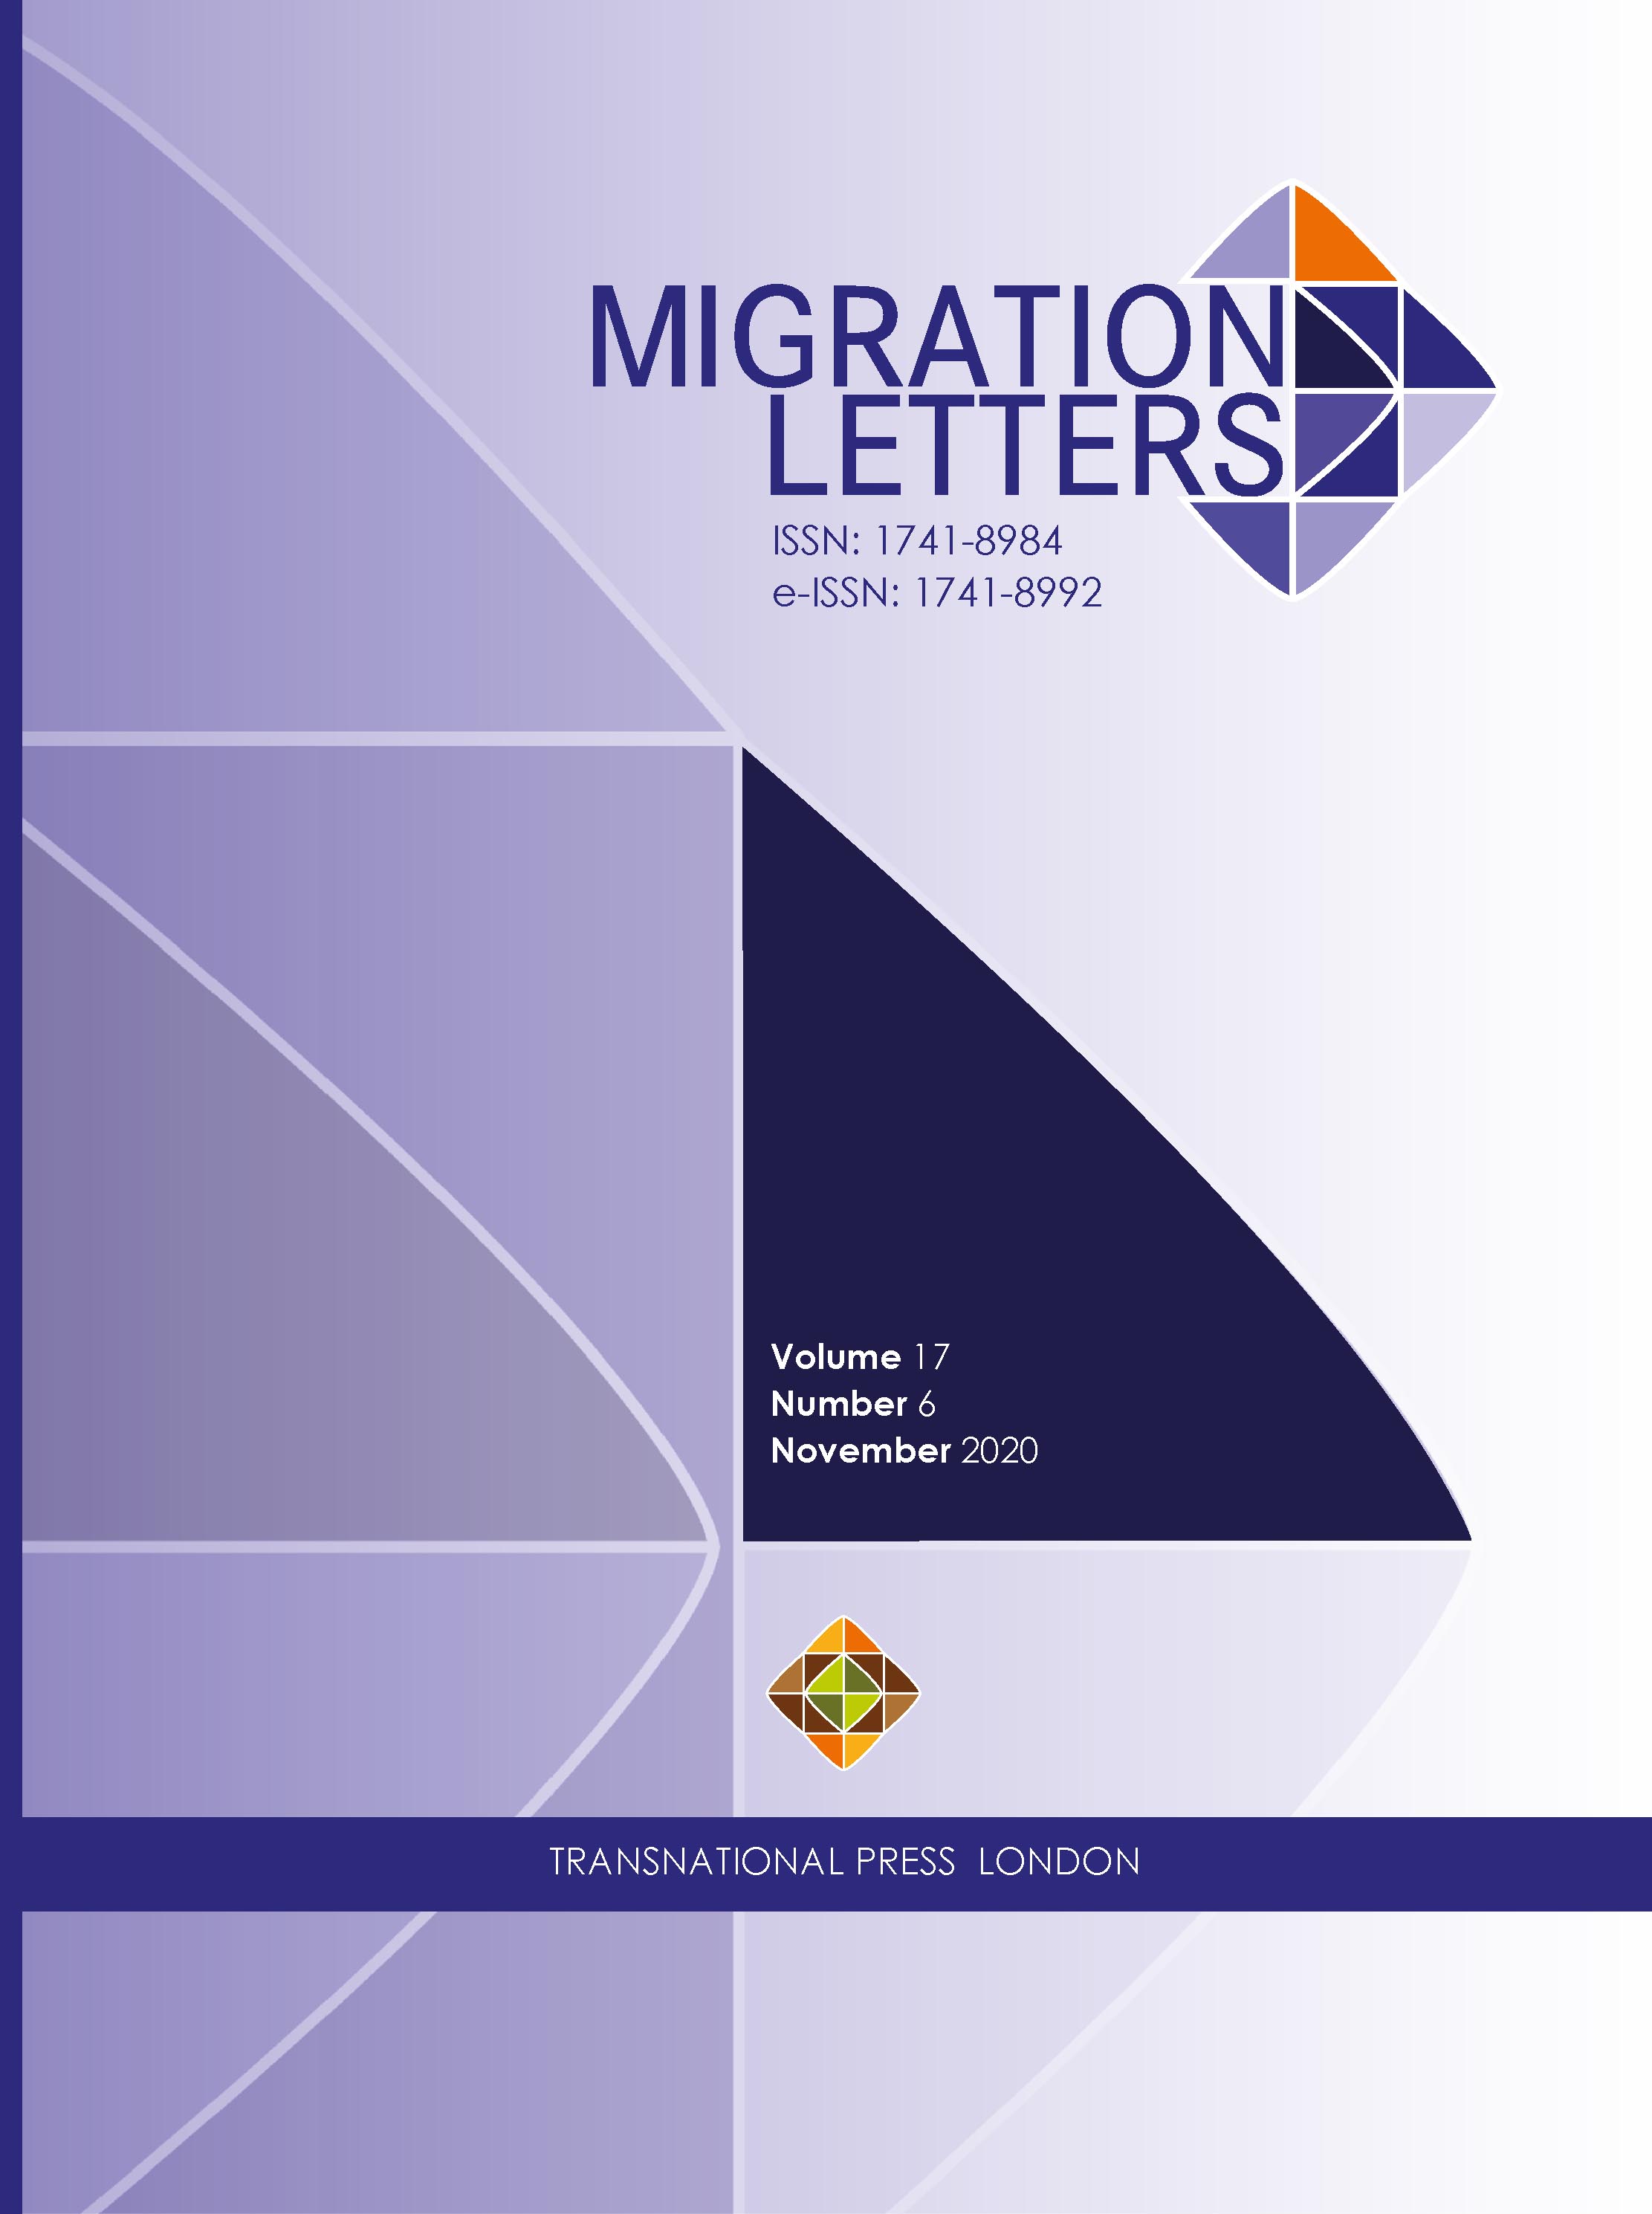 Characteristics of migrants coming to Europe: A survey among asylum seekers and refugees in Germany about their journey